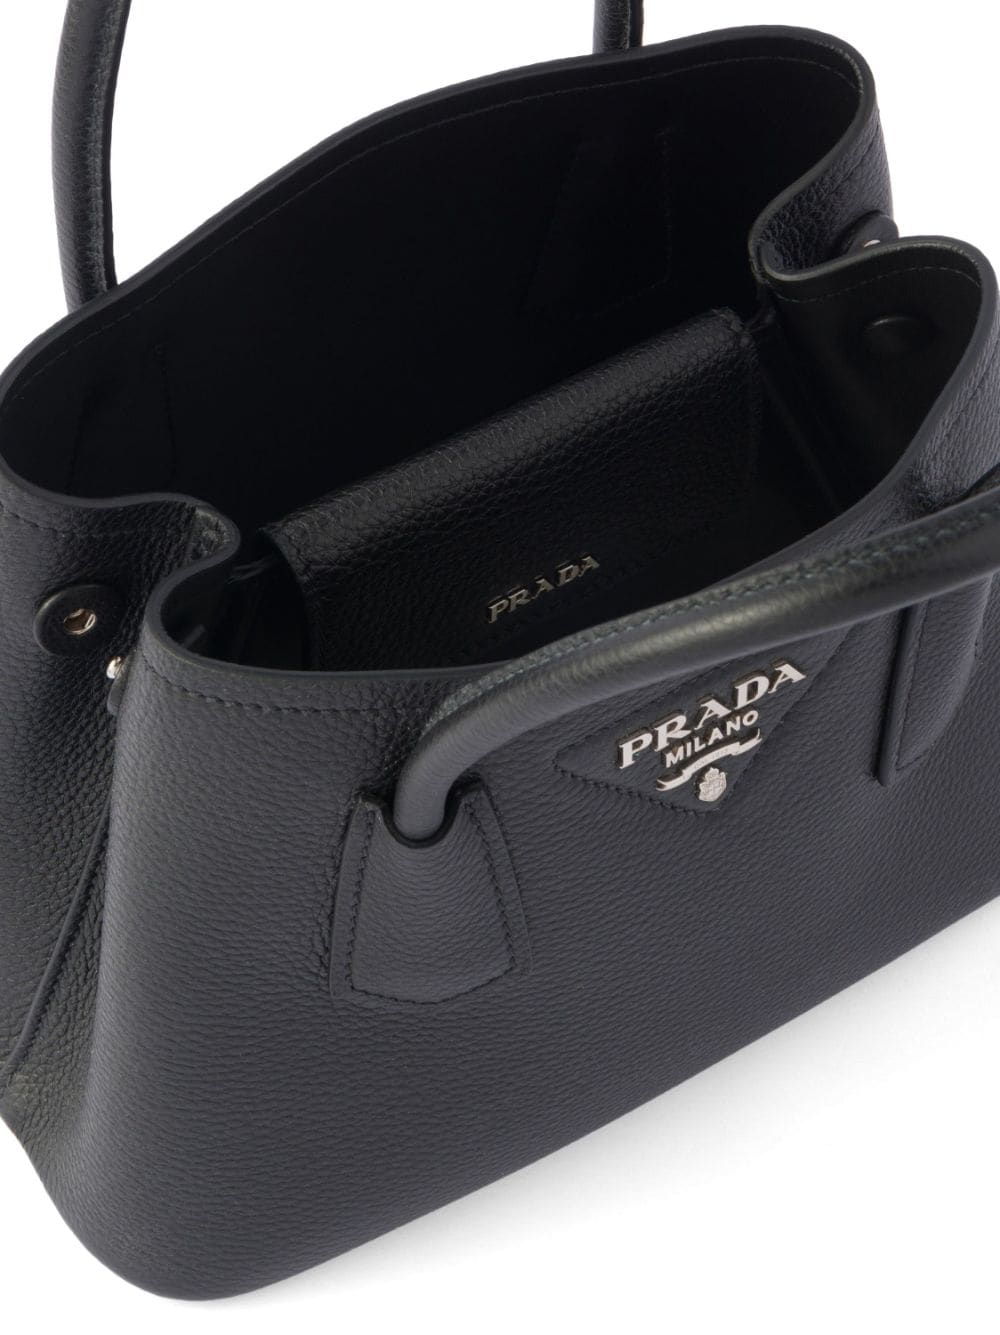 Double The Joy With Prada's Saffiano Leather Mini Pouch - BAGAHOLICBOY